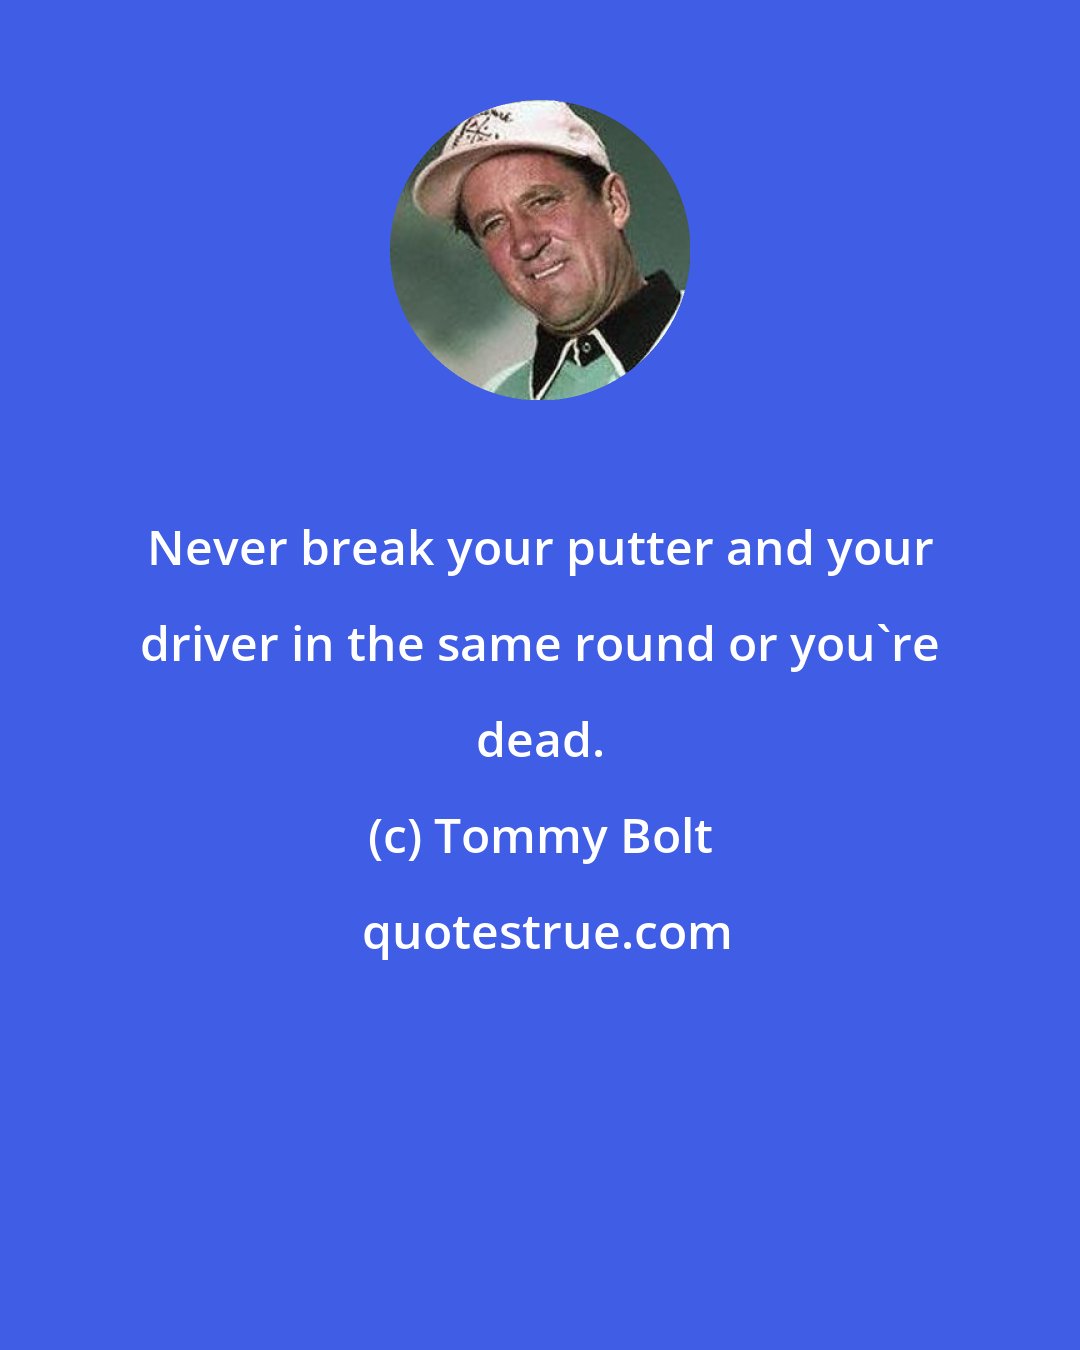 Tommy Bolt: Never break your putter and your driver in the same round or you're dead.